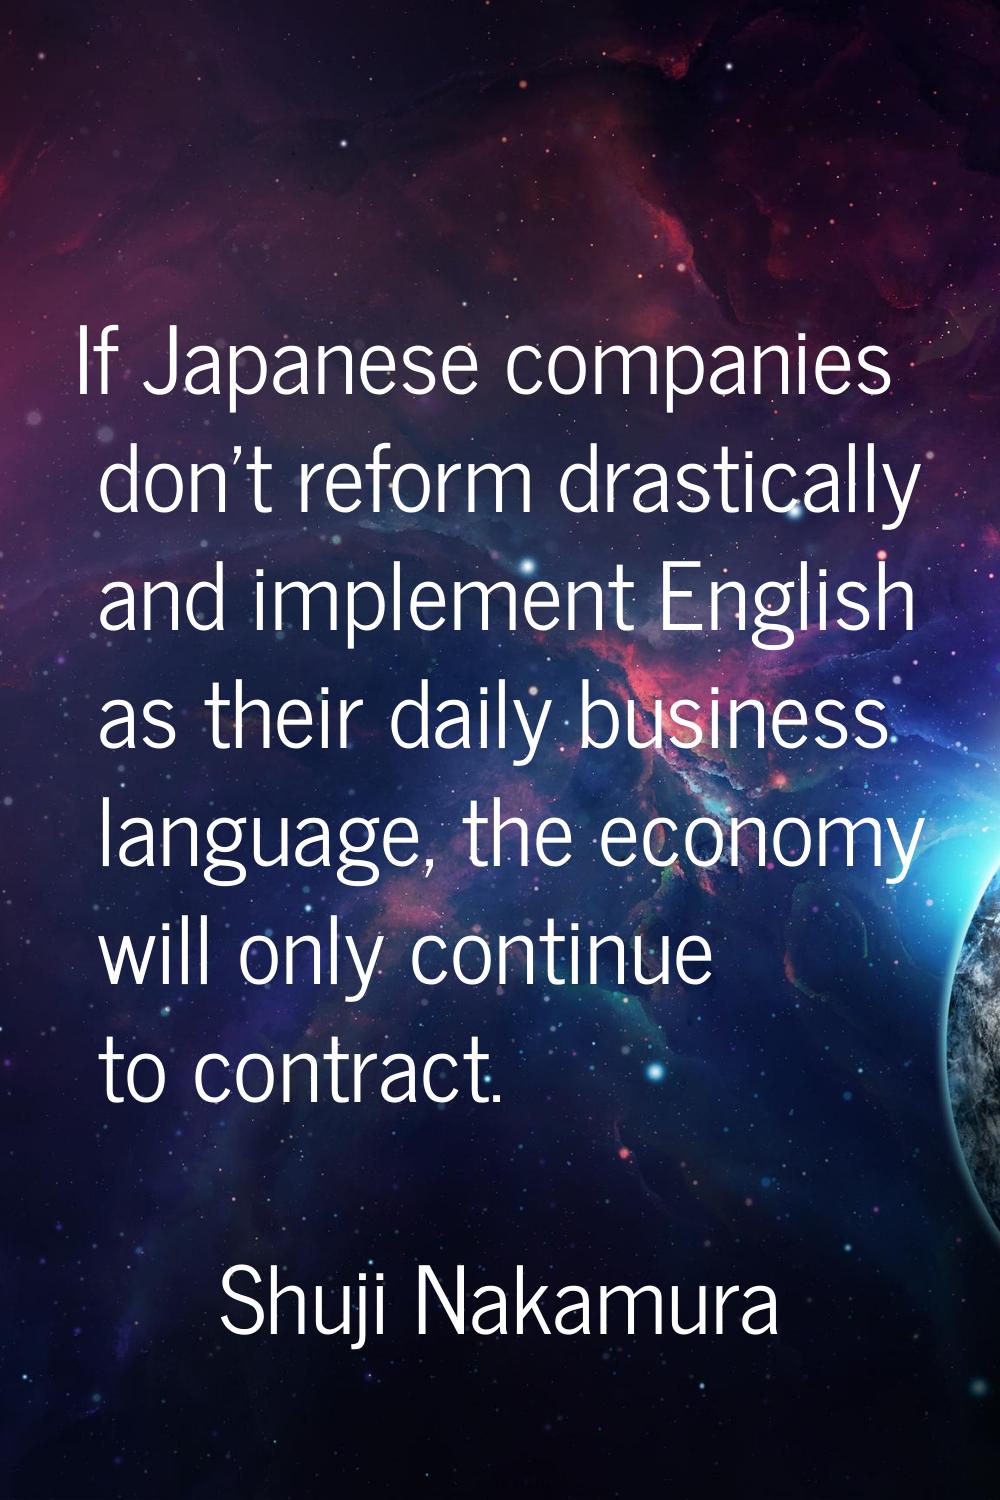 If Japanese companies don't reform drastically and implement English as their daily business langua